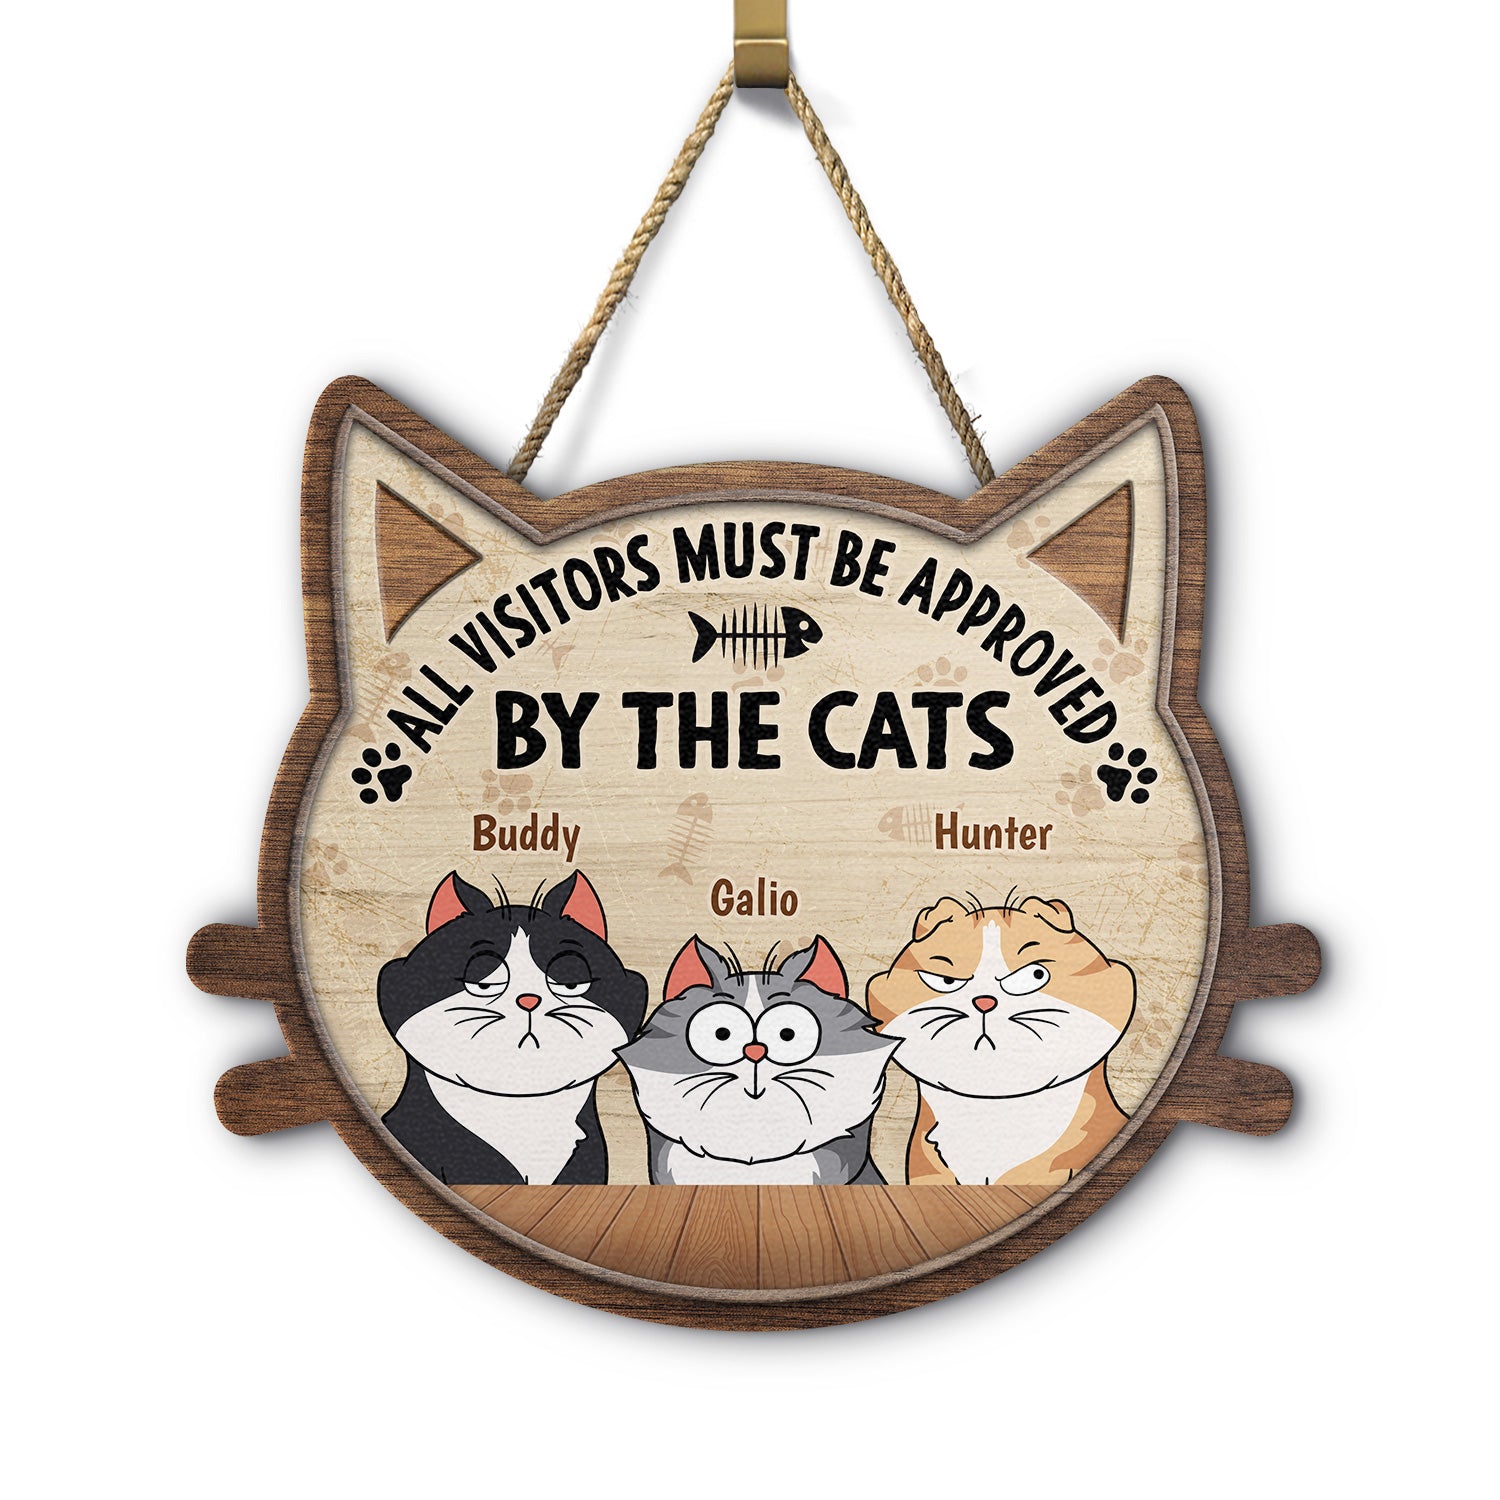 All Visitors Must Be Approved By - Gift For Cat Lovers - Personalized Custom Shaped Wood Sign